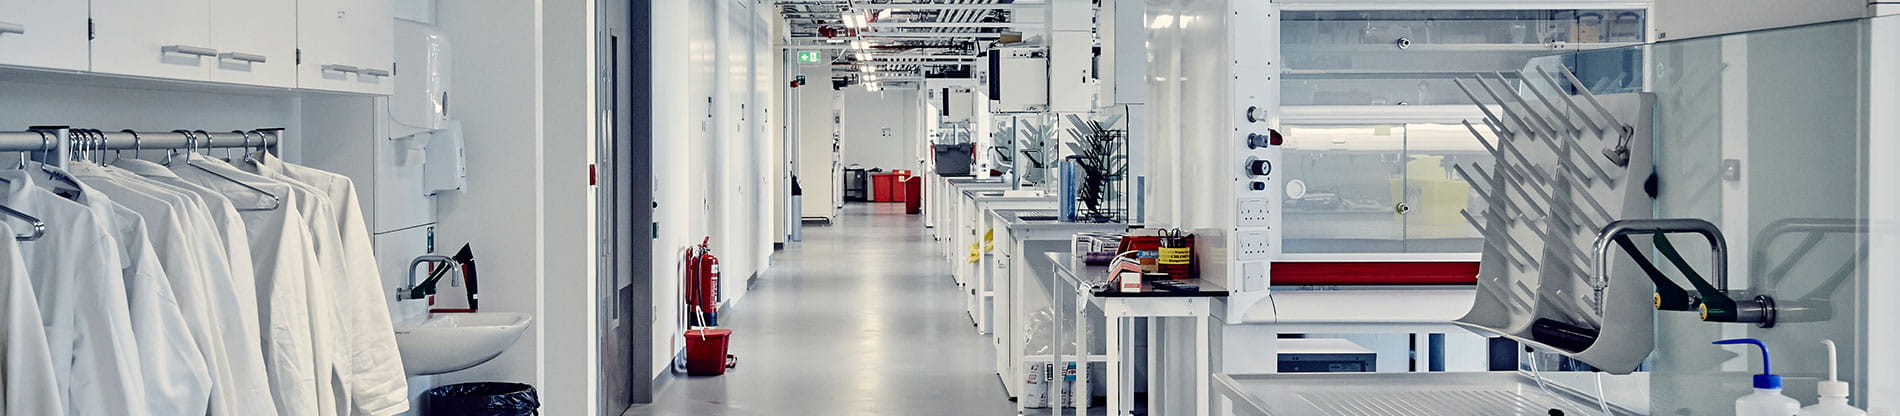 Interior Imperial College Laboratory  refurbished by ISG